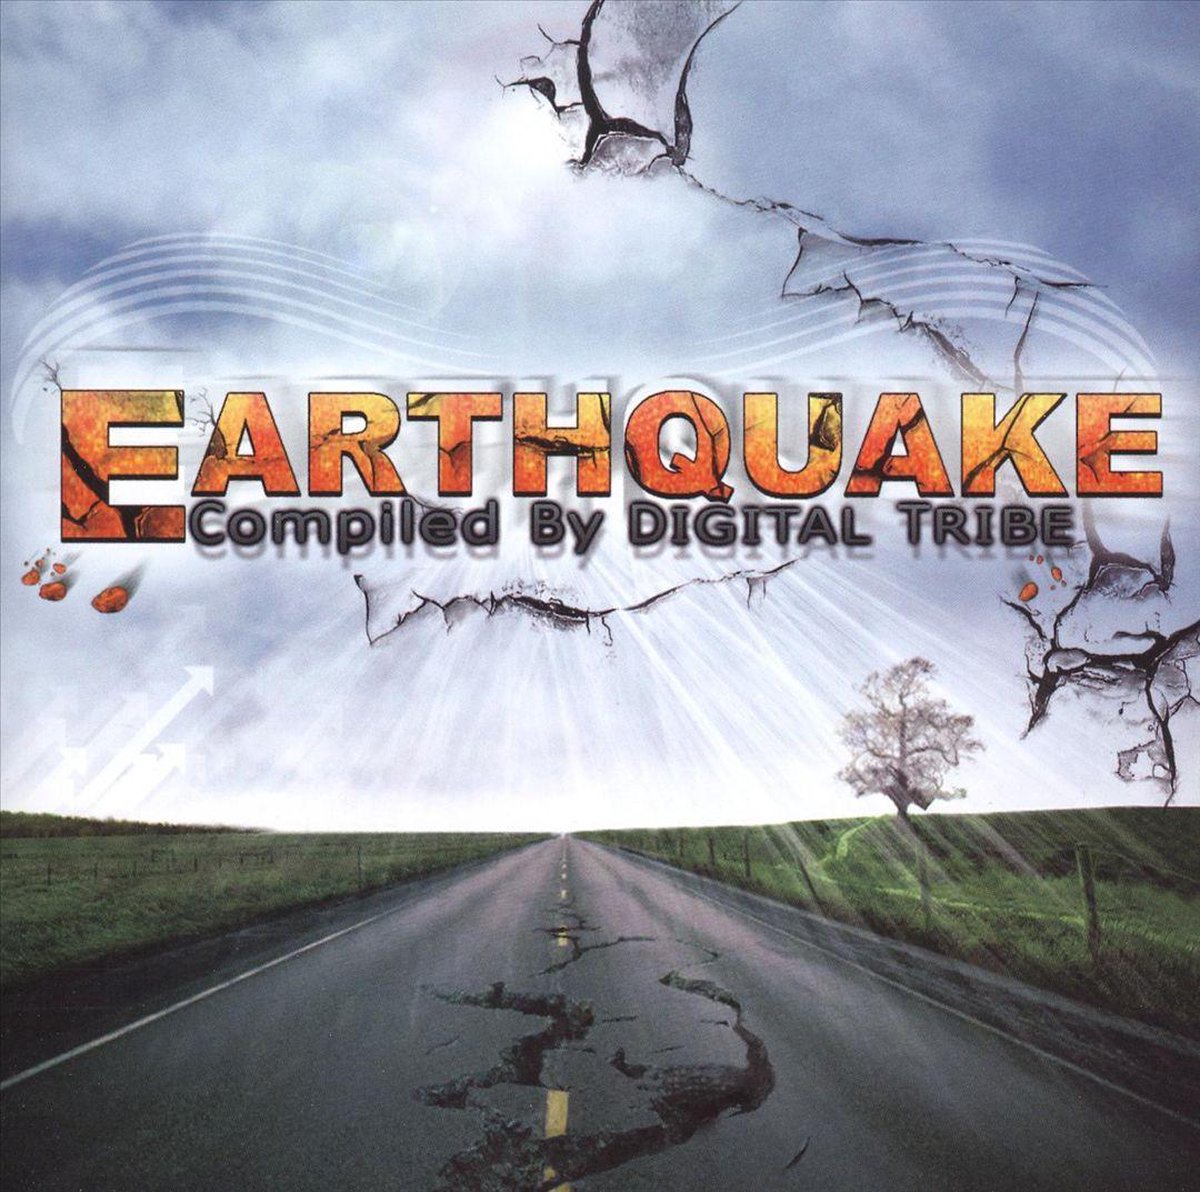 Earthquake [Psy Core] - various artists